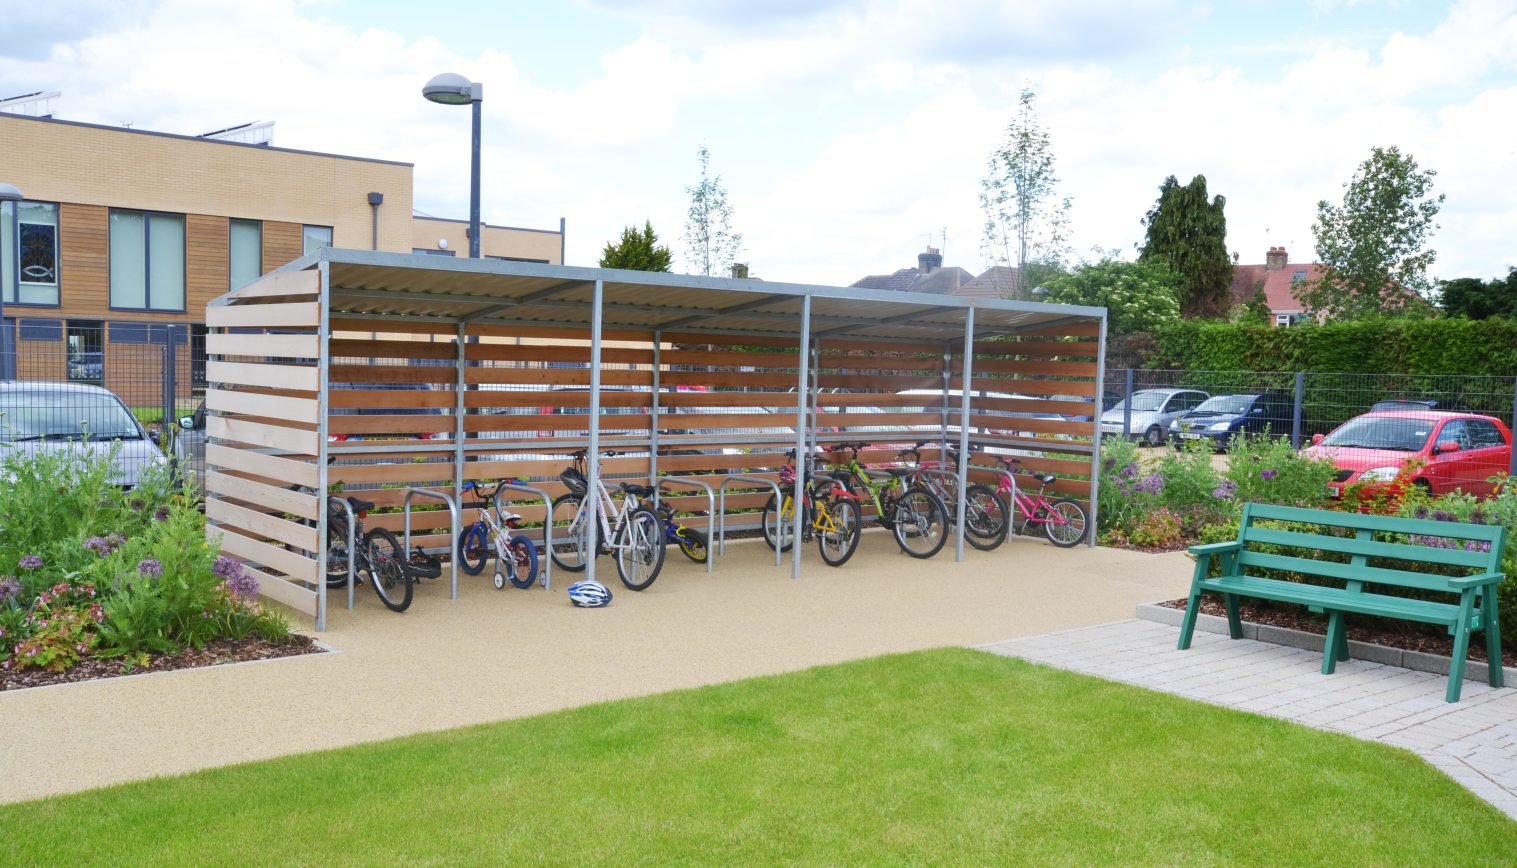 All Saints CE Junior School – 2nd Timber Cycle Shelter